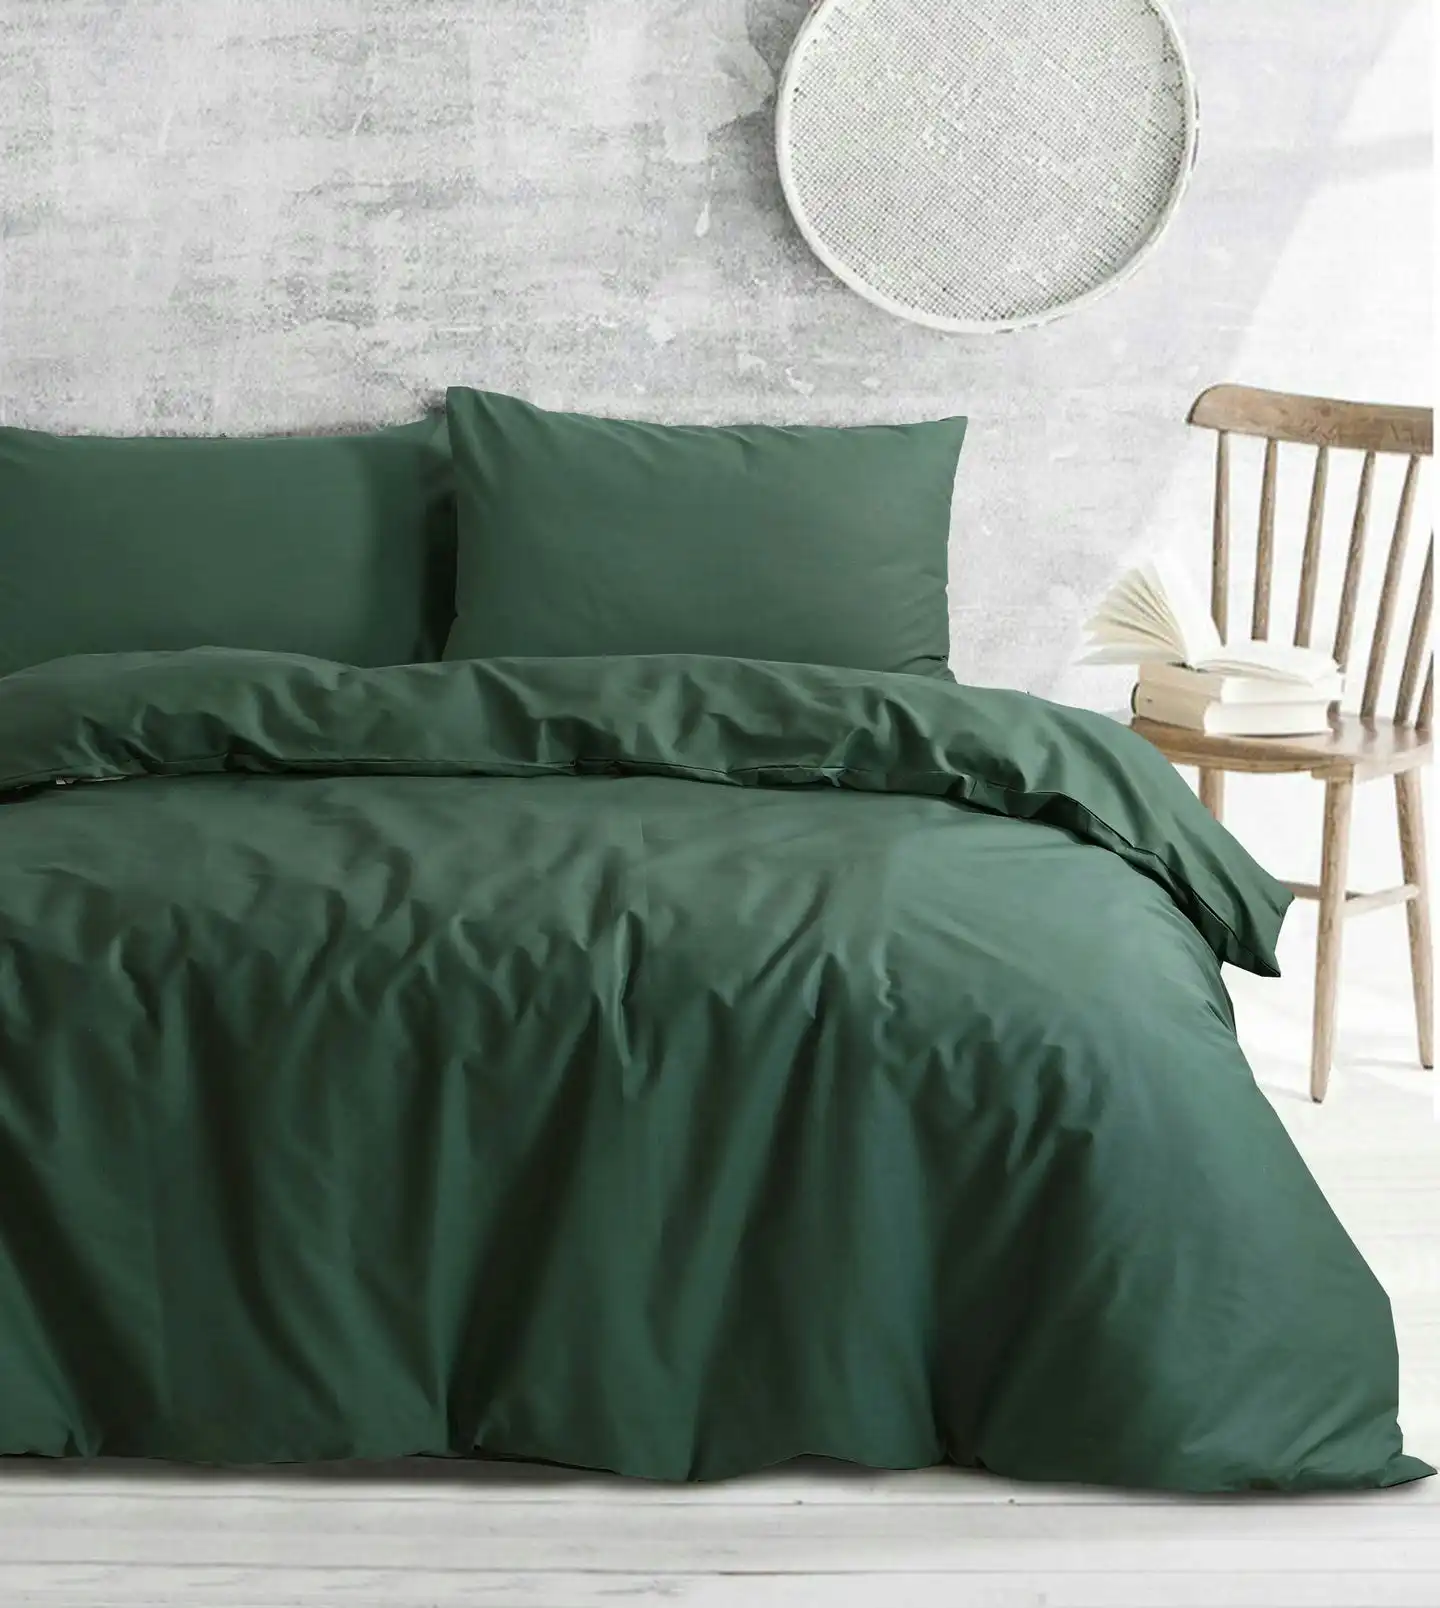 Amsons Royale Cotton Quilt Duvet Doona Cover Set with Europeon pillowcases - Sage